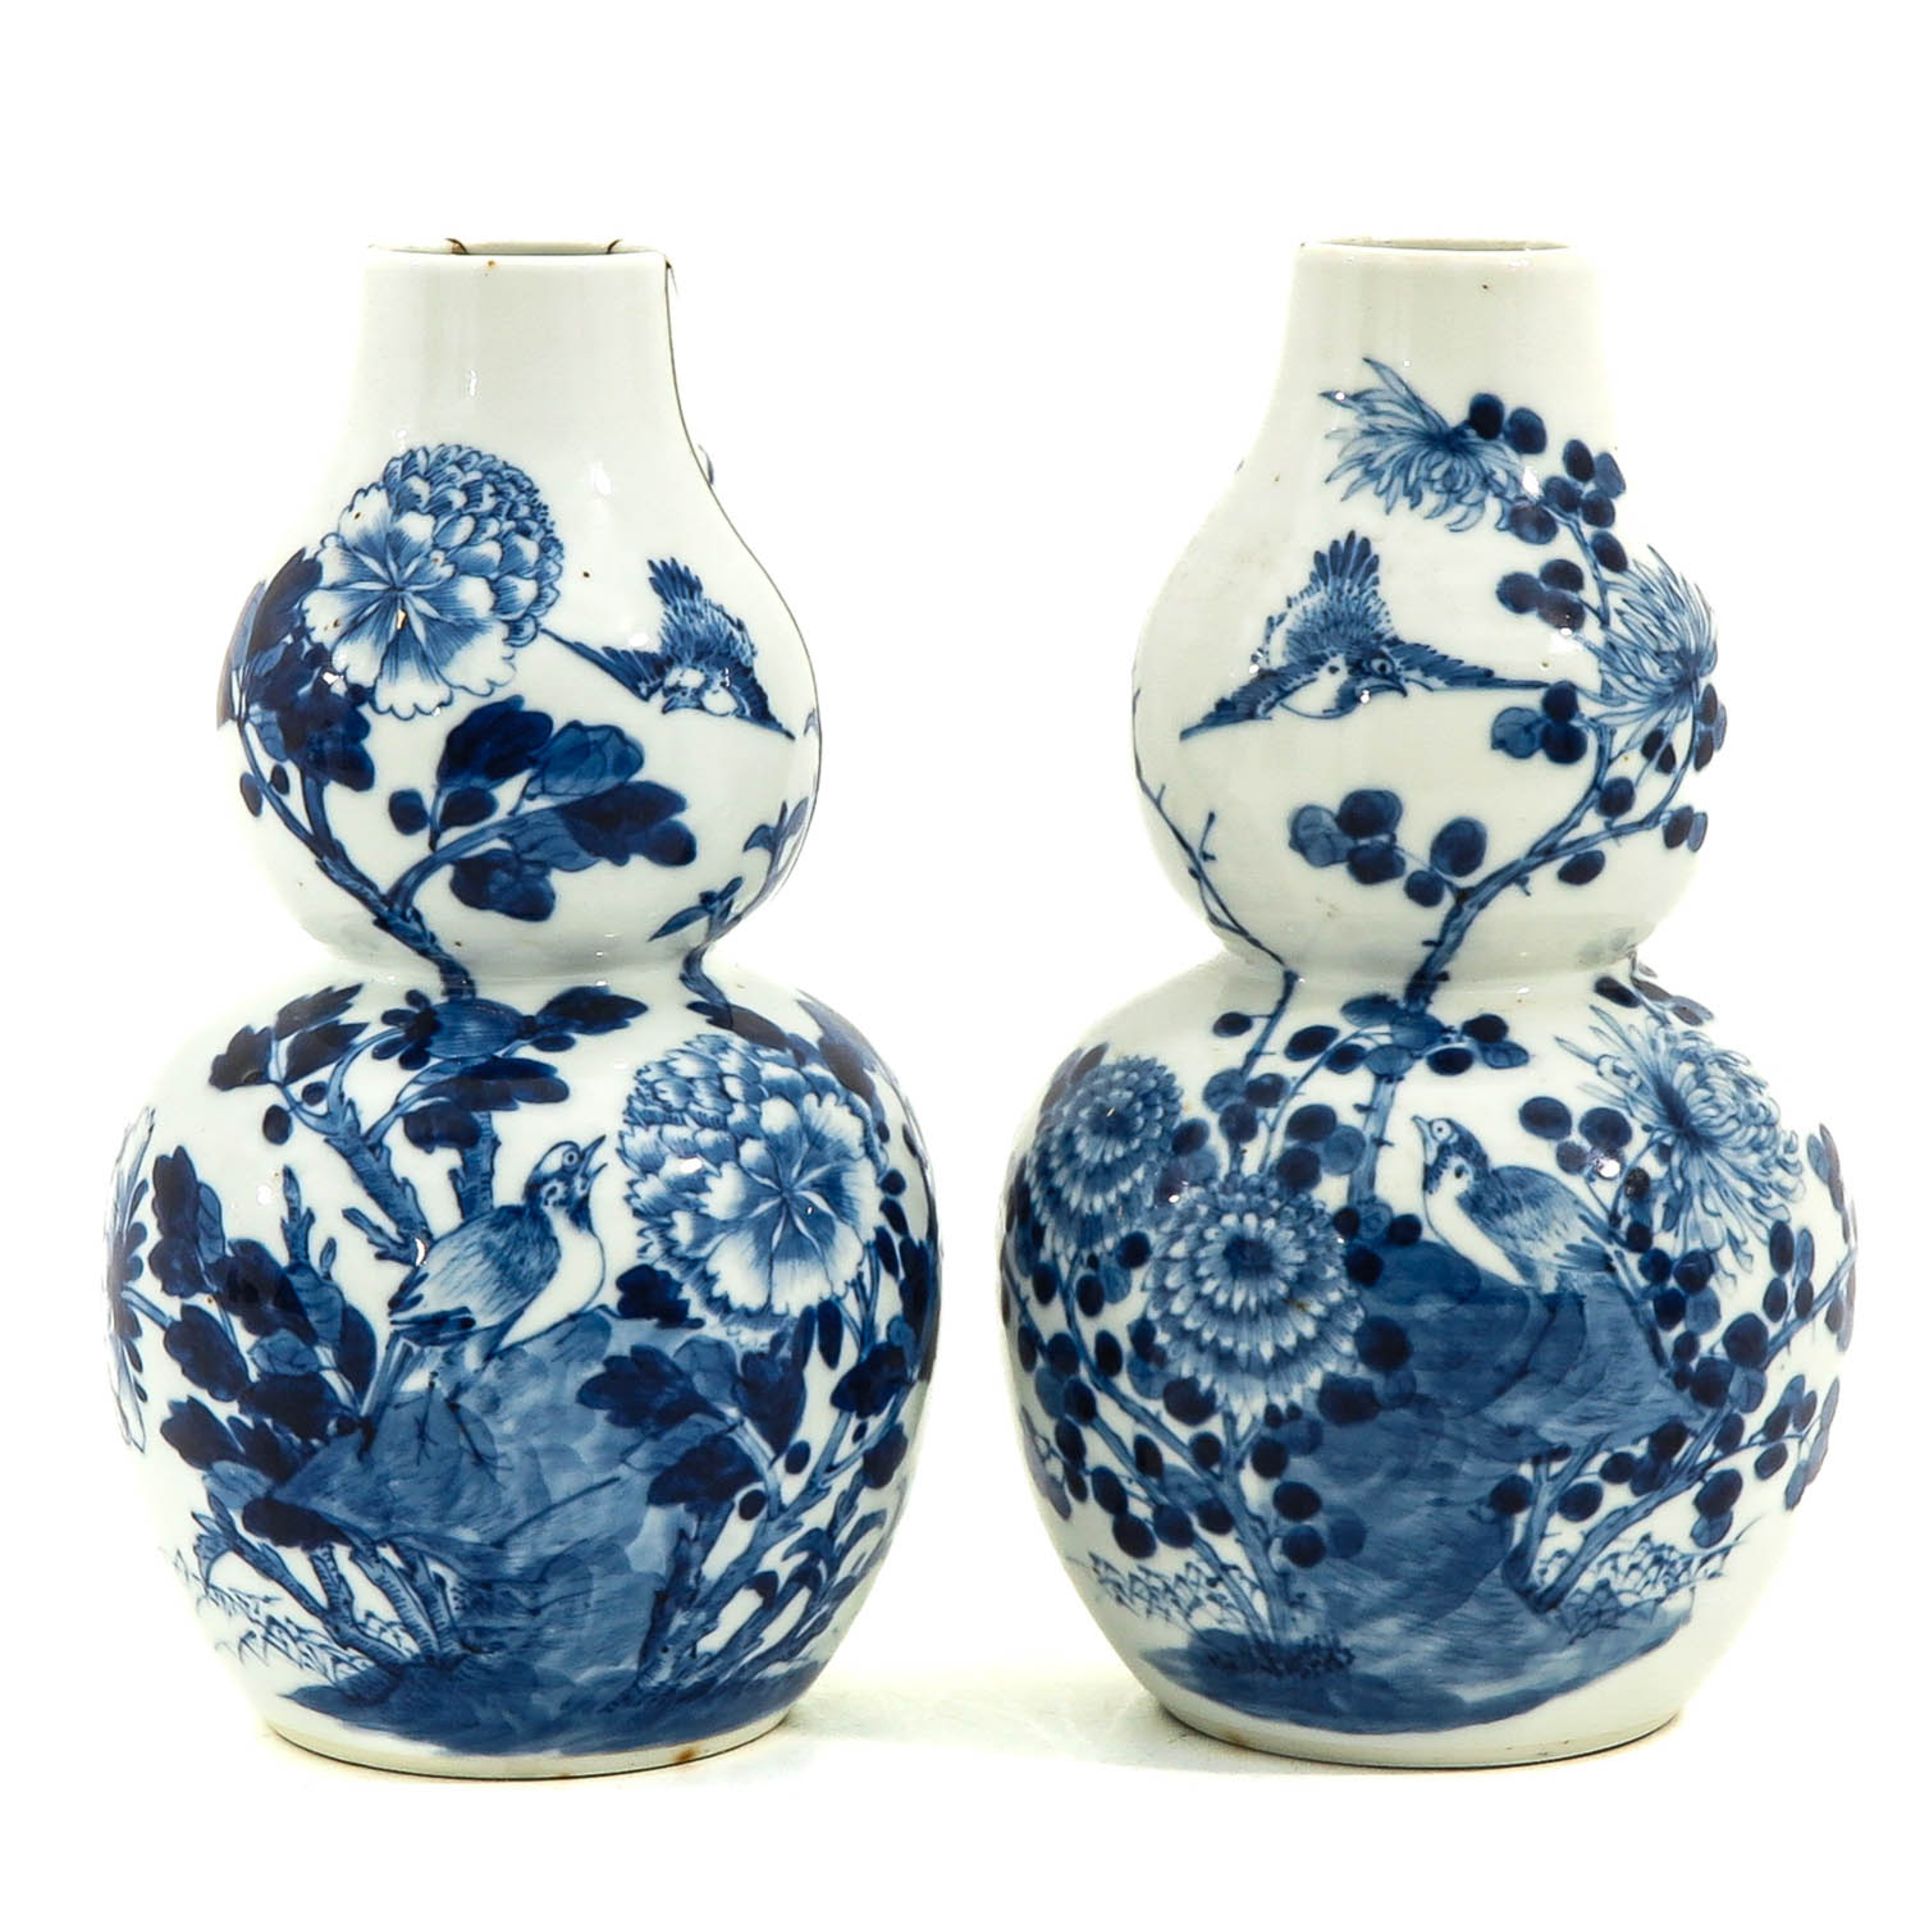 A Pair of Blue and White Gourd Vases